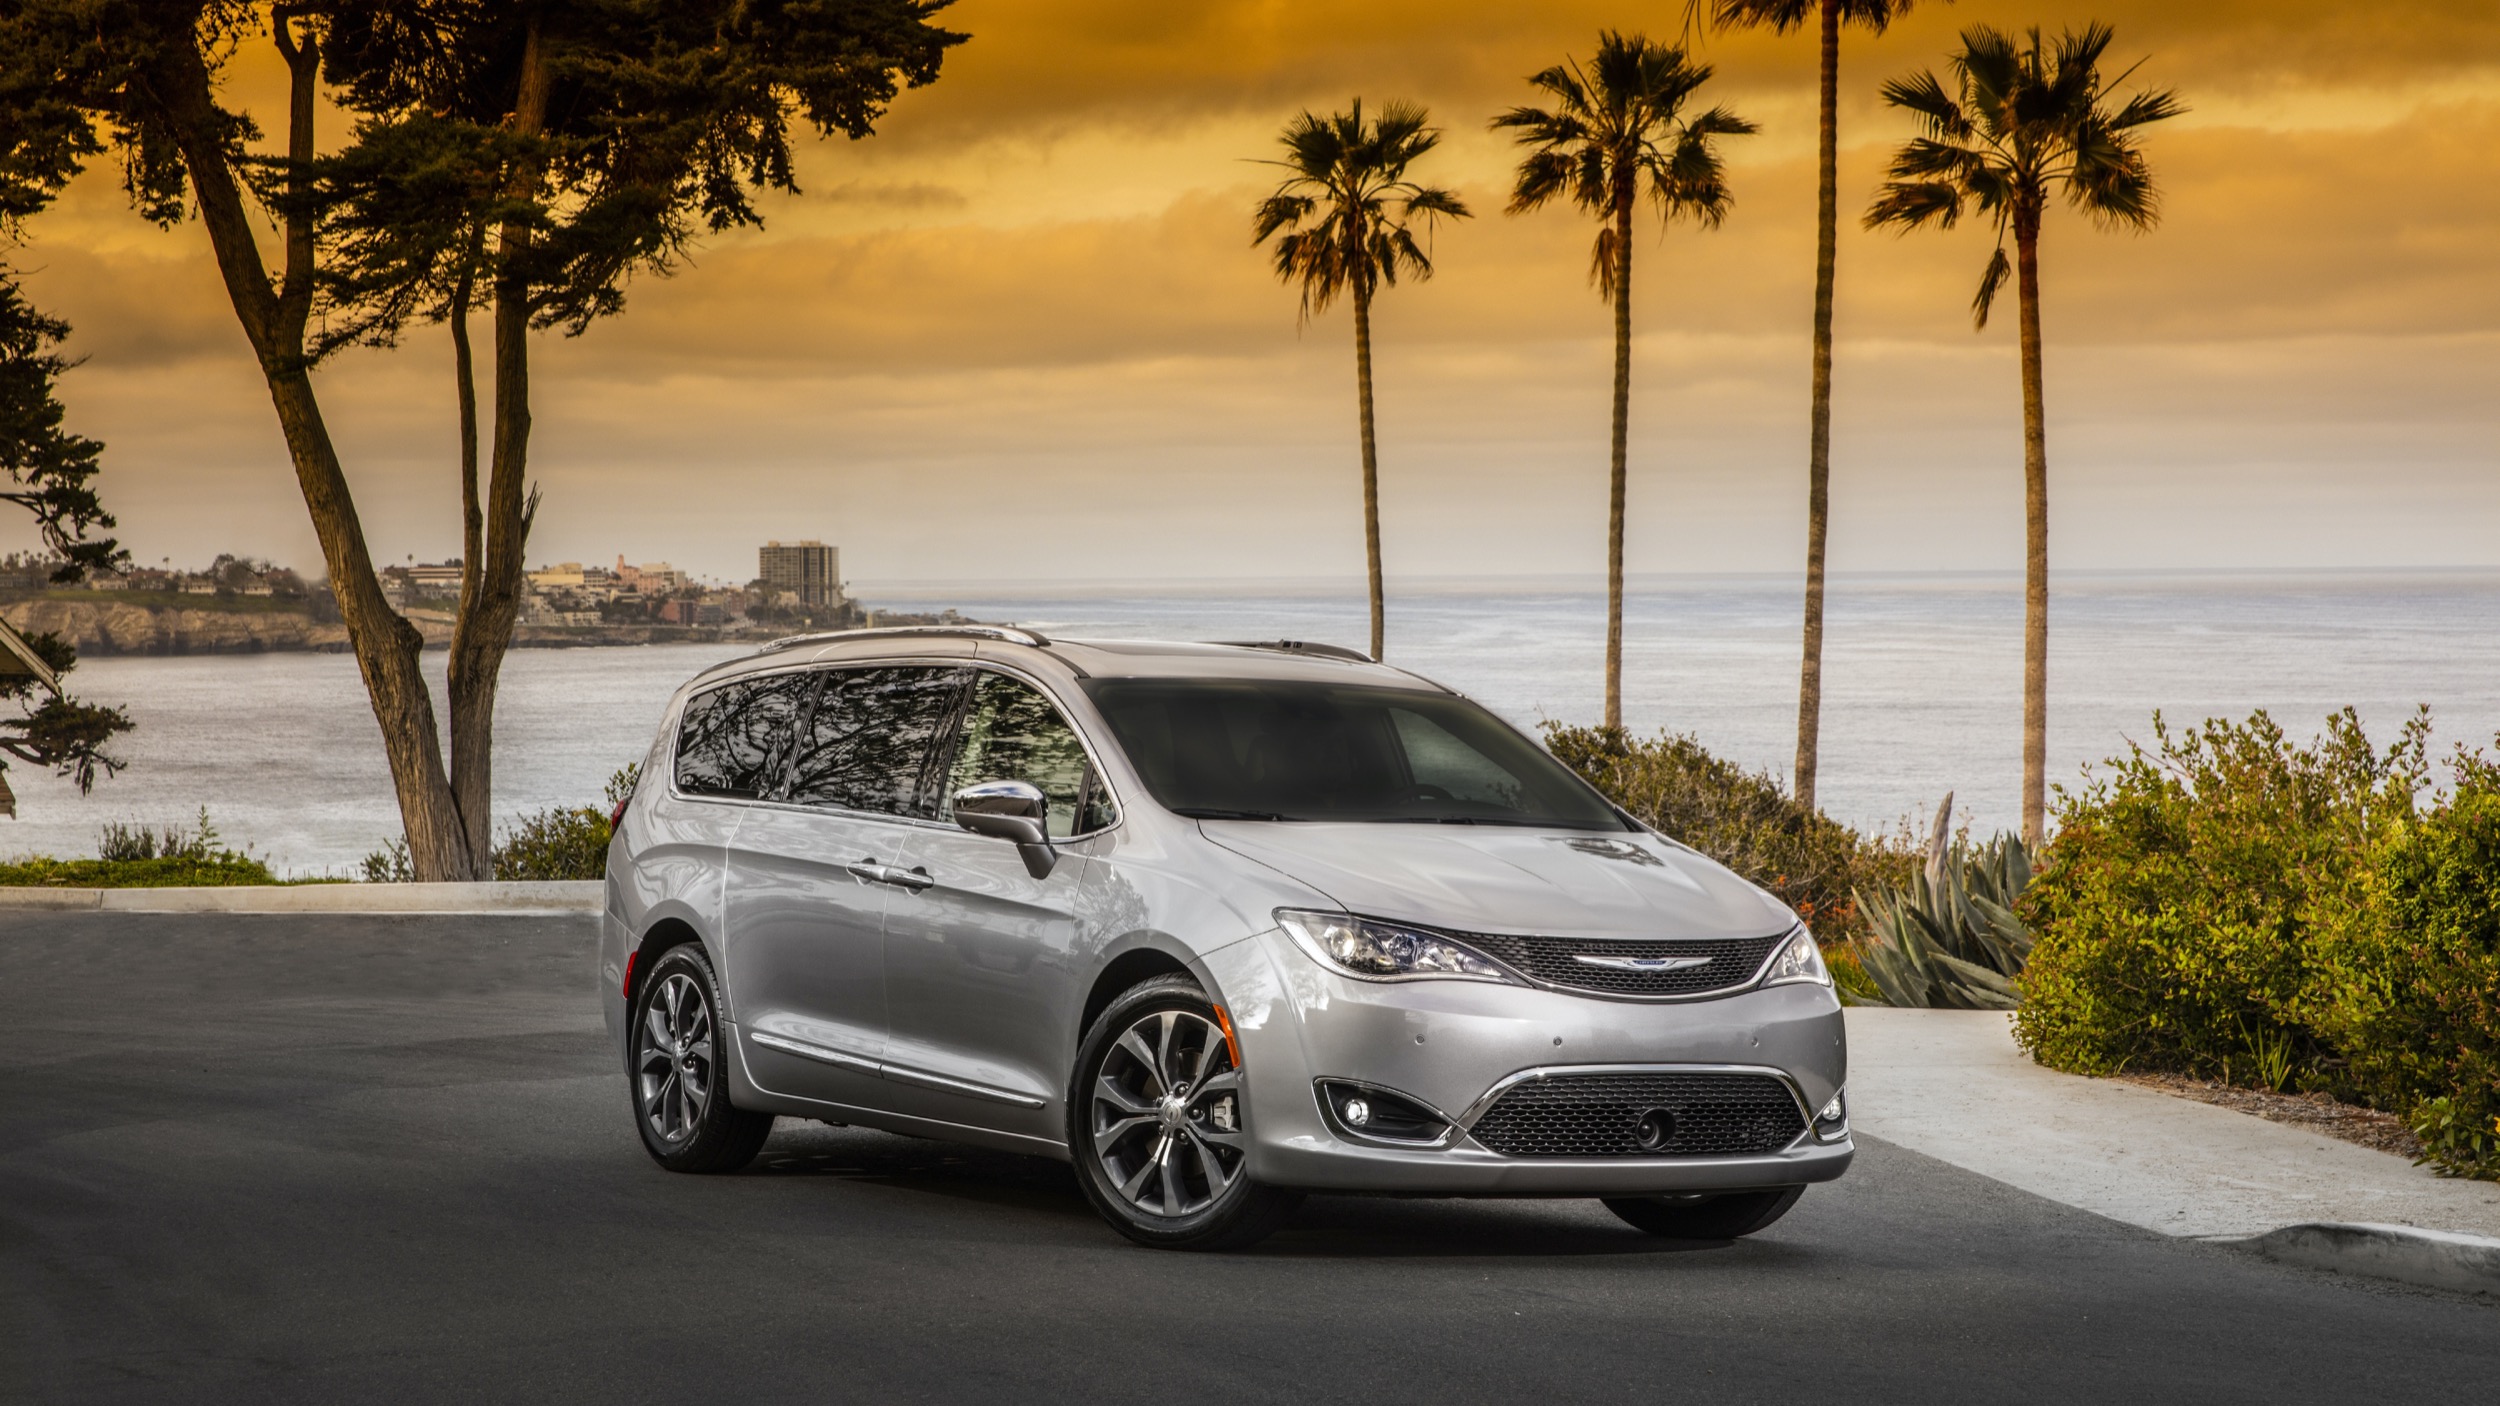 2020 Chrysler Pacifica Review Hybrid Price Specs Features And Photos